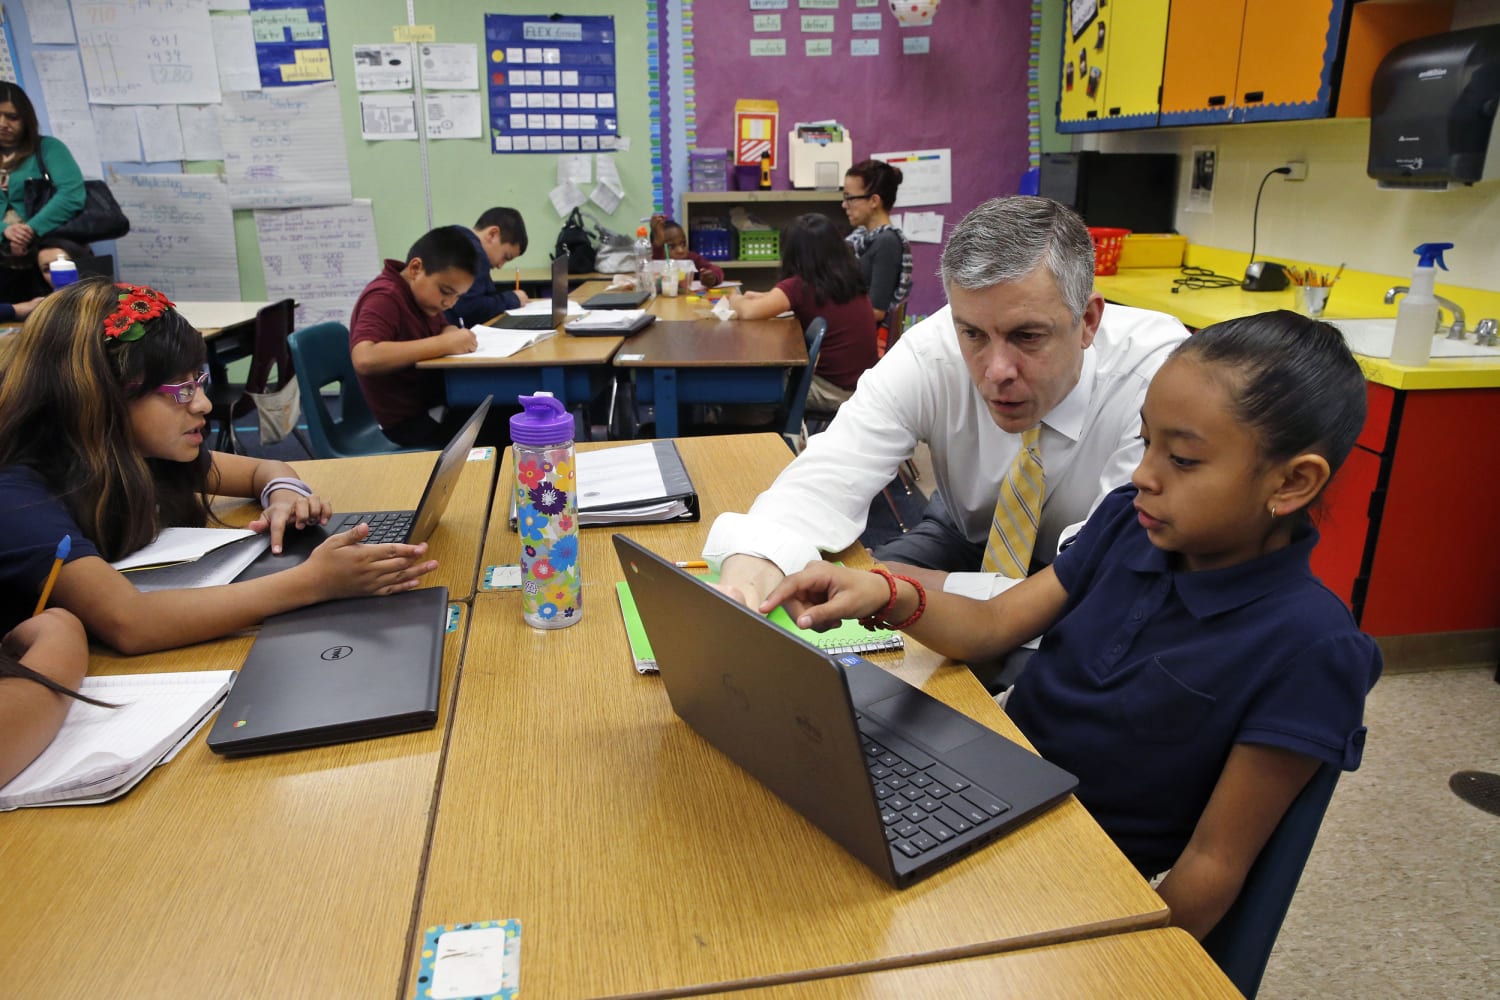 How Arne Duncan Reshaped American Education And Made Enemies Along